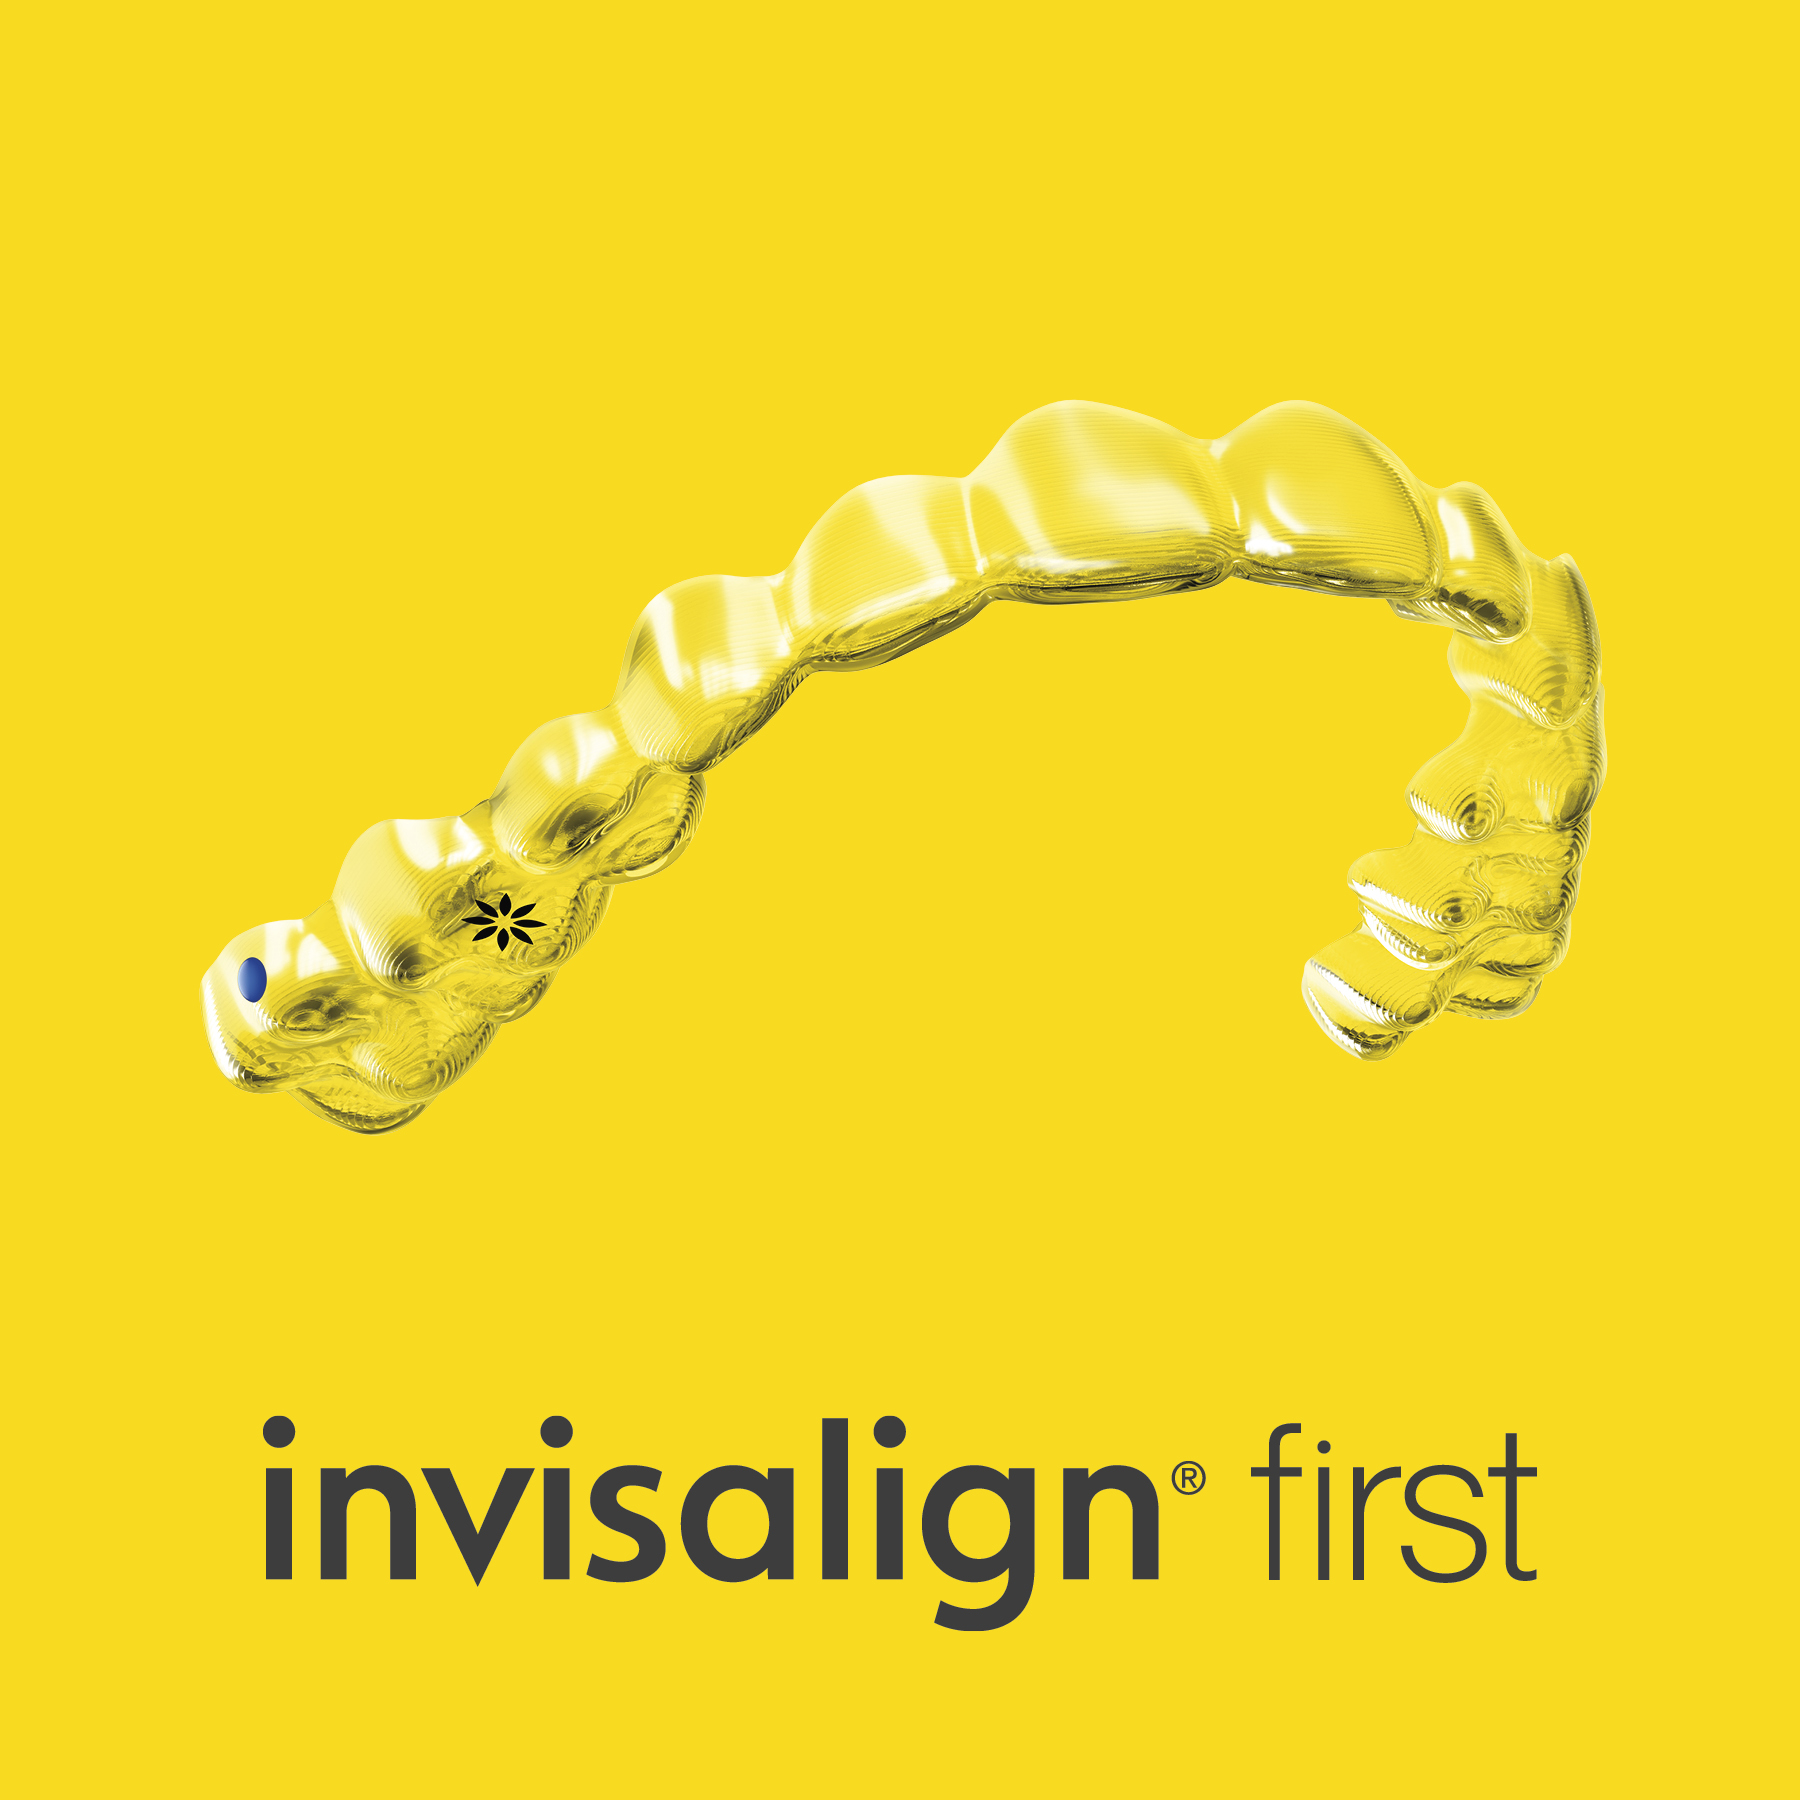 Enhanced Dental Products: Vivera Retainers and Invisalign First Clear  Aligners from Align Technology